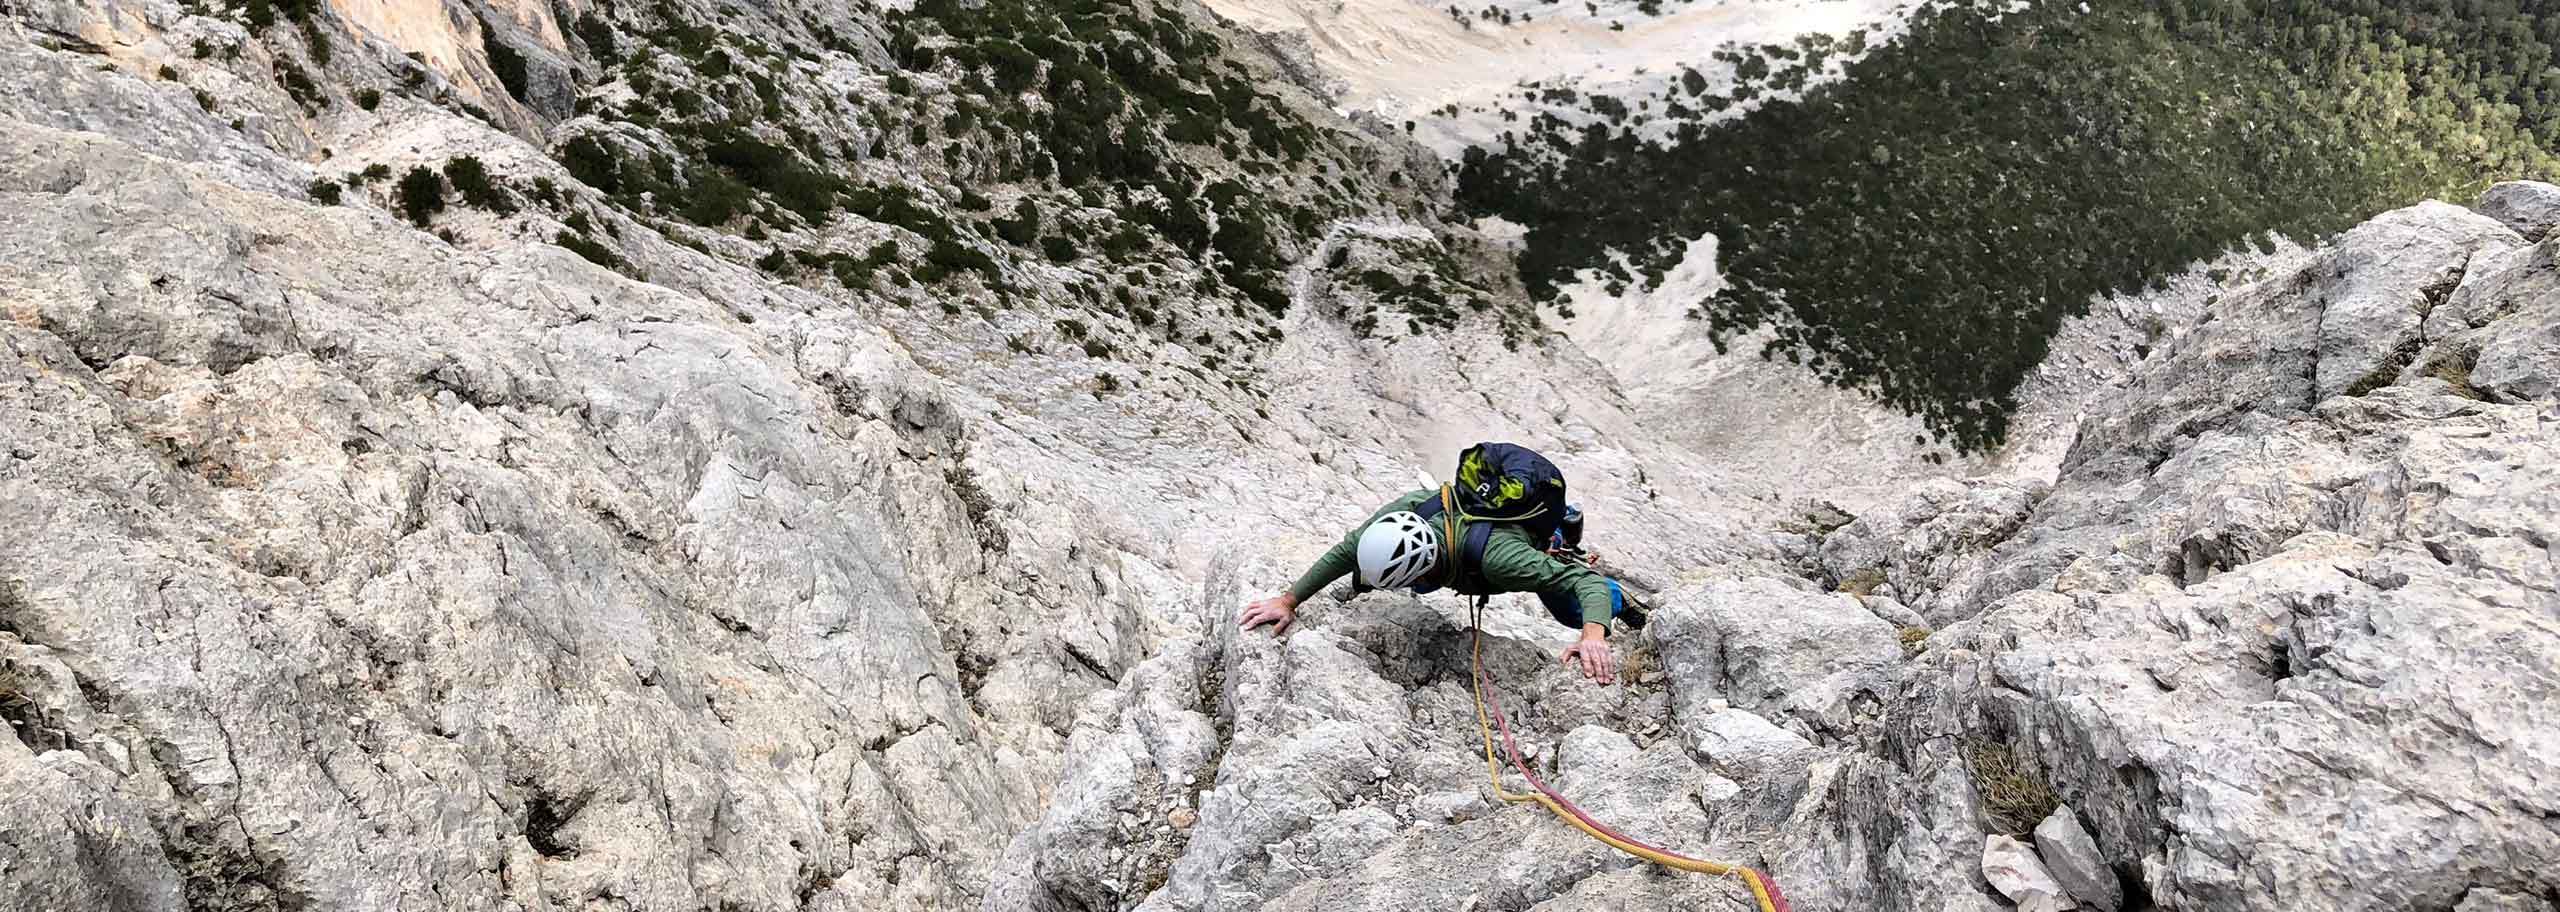 Rock Climbing in Alleghe, Trad and Sport Climbing